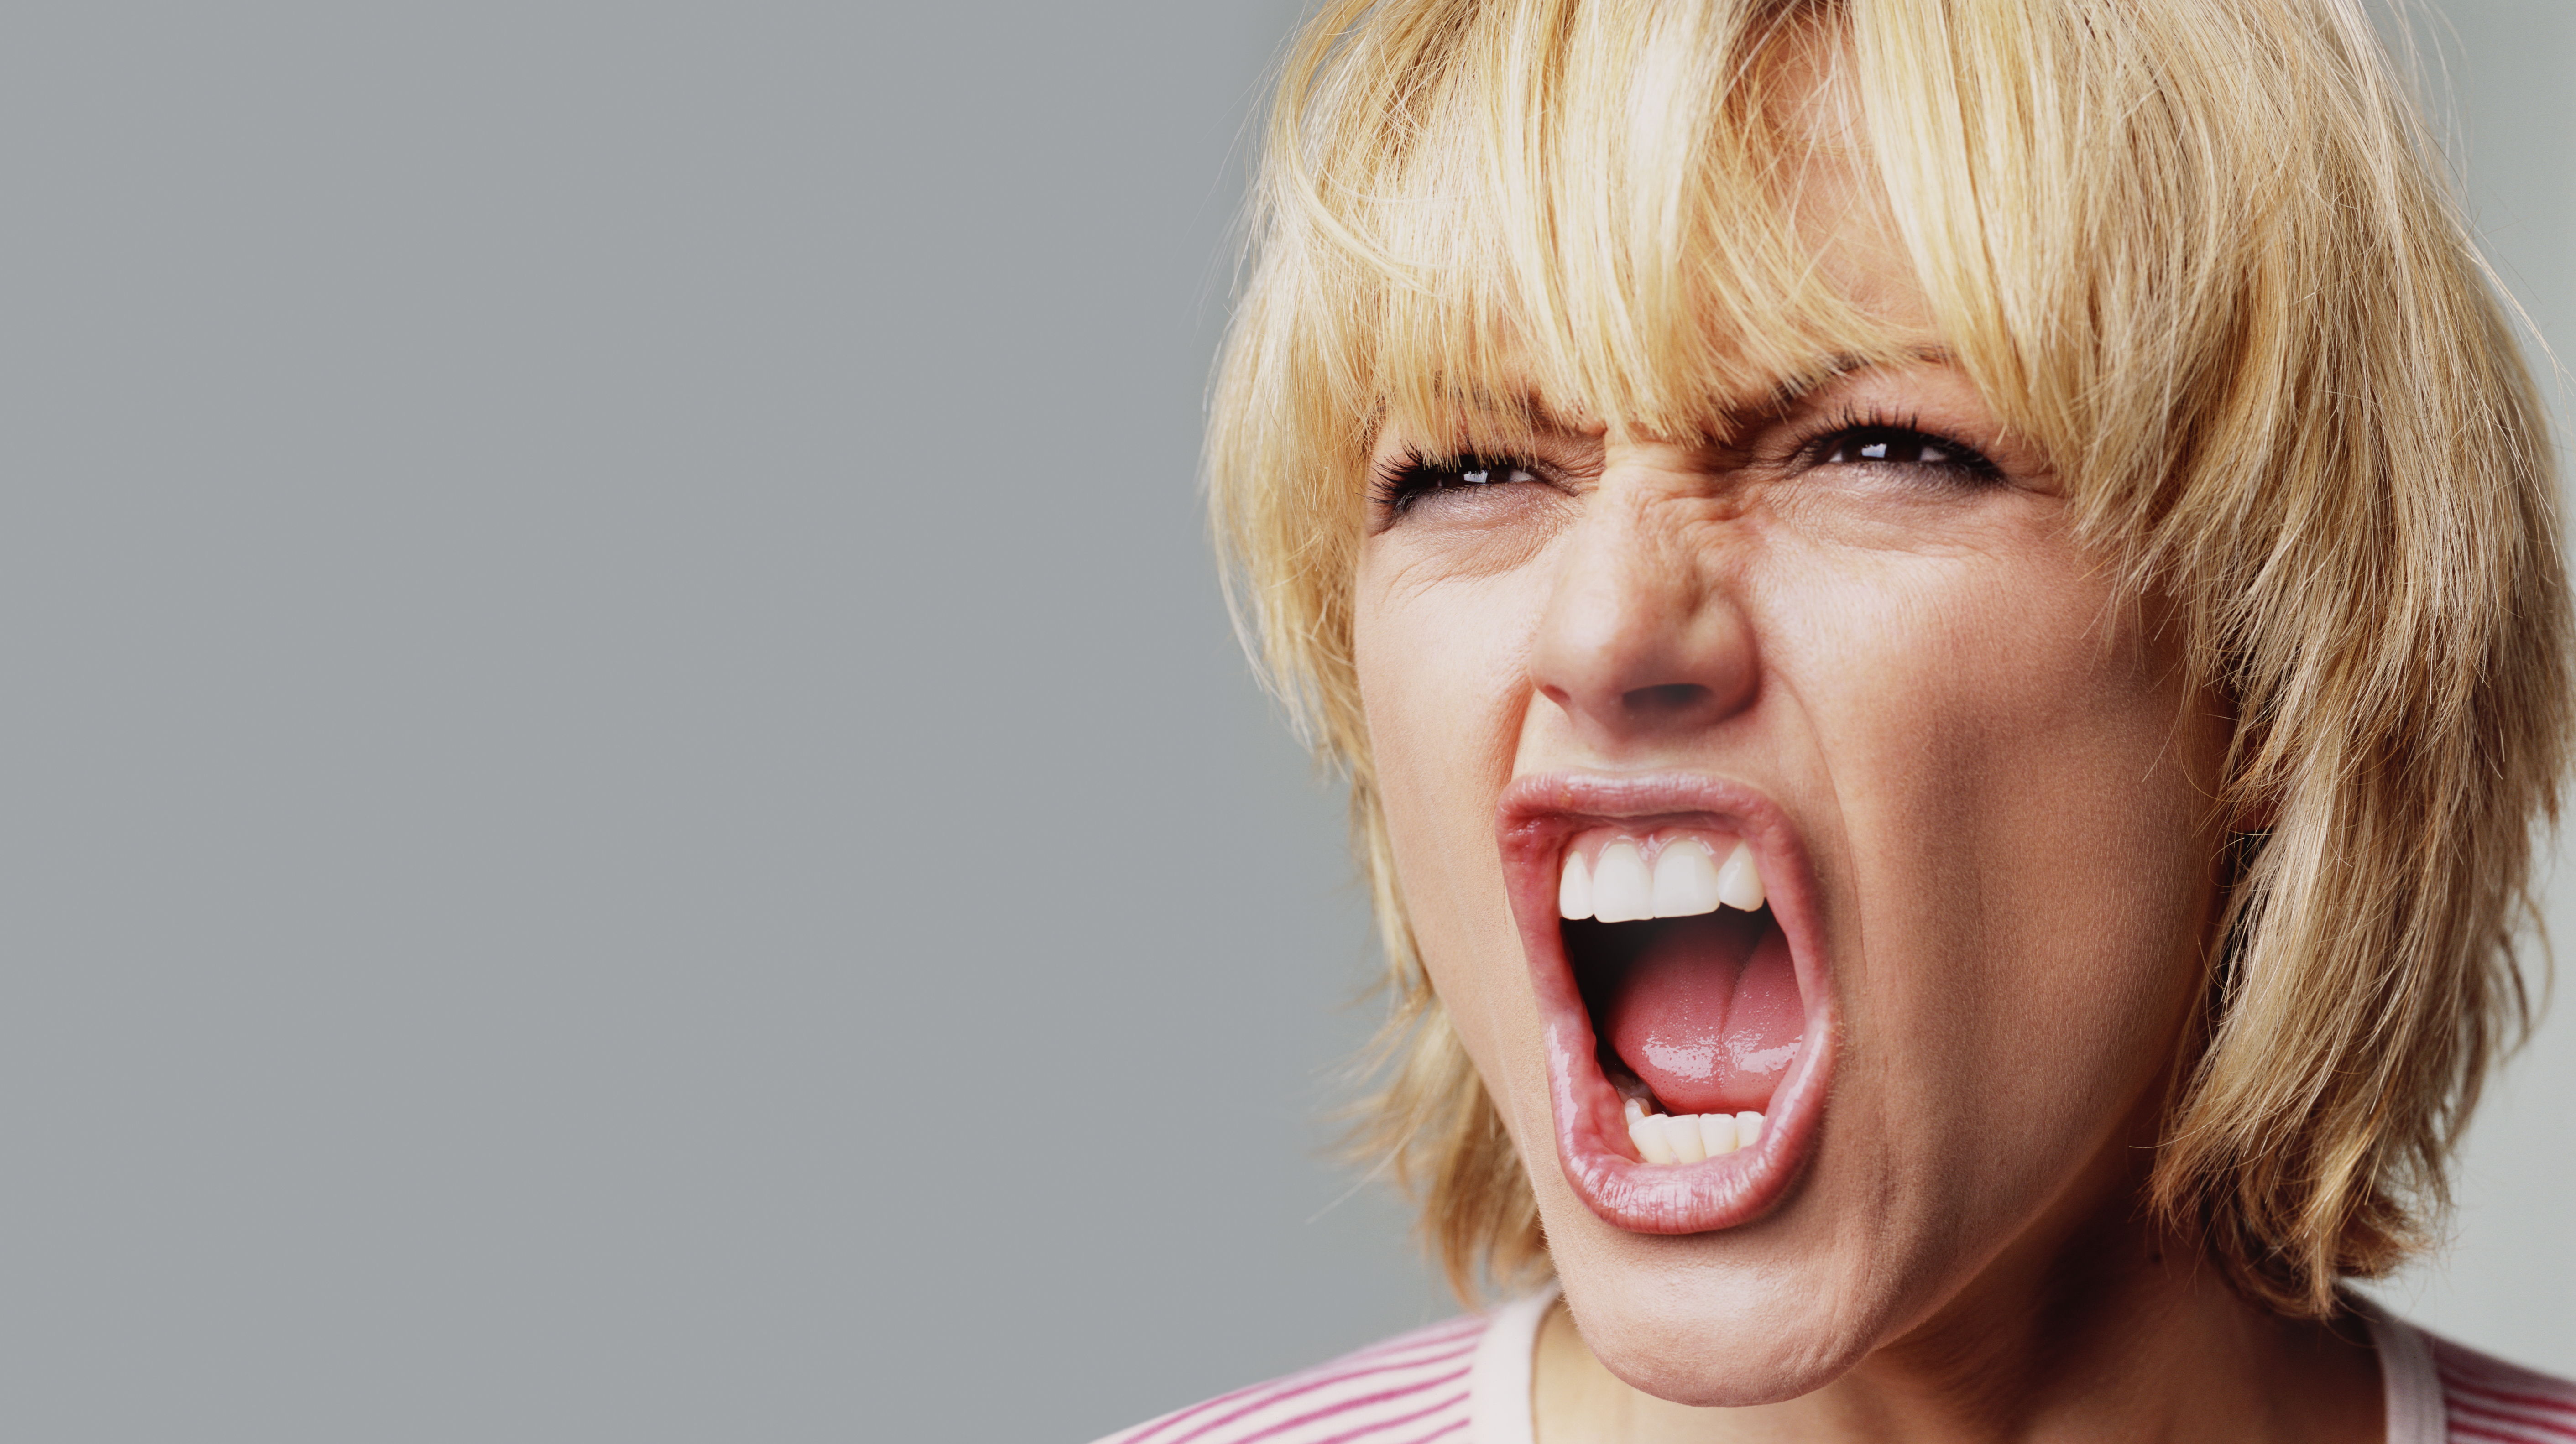 An angry woman | Source: Getty Images